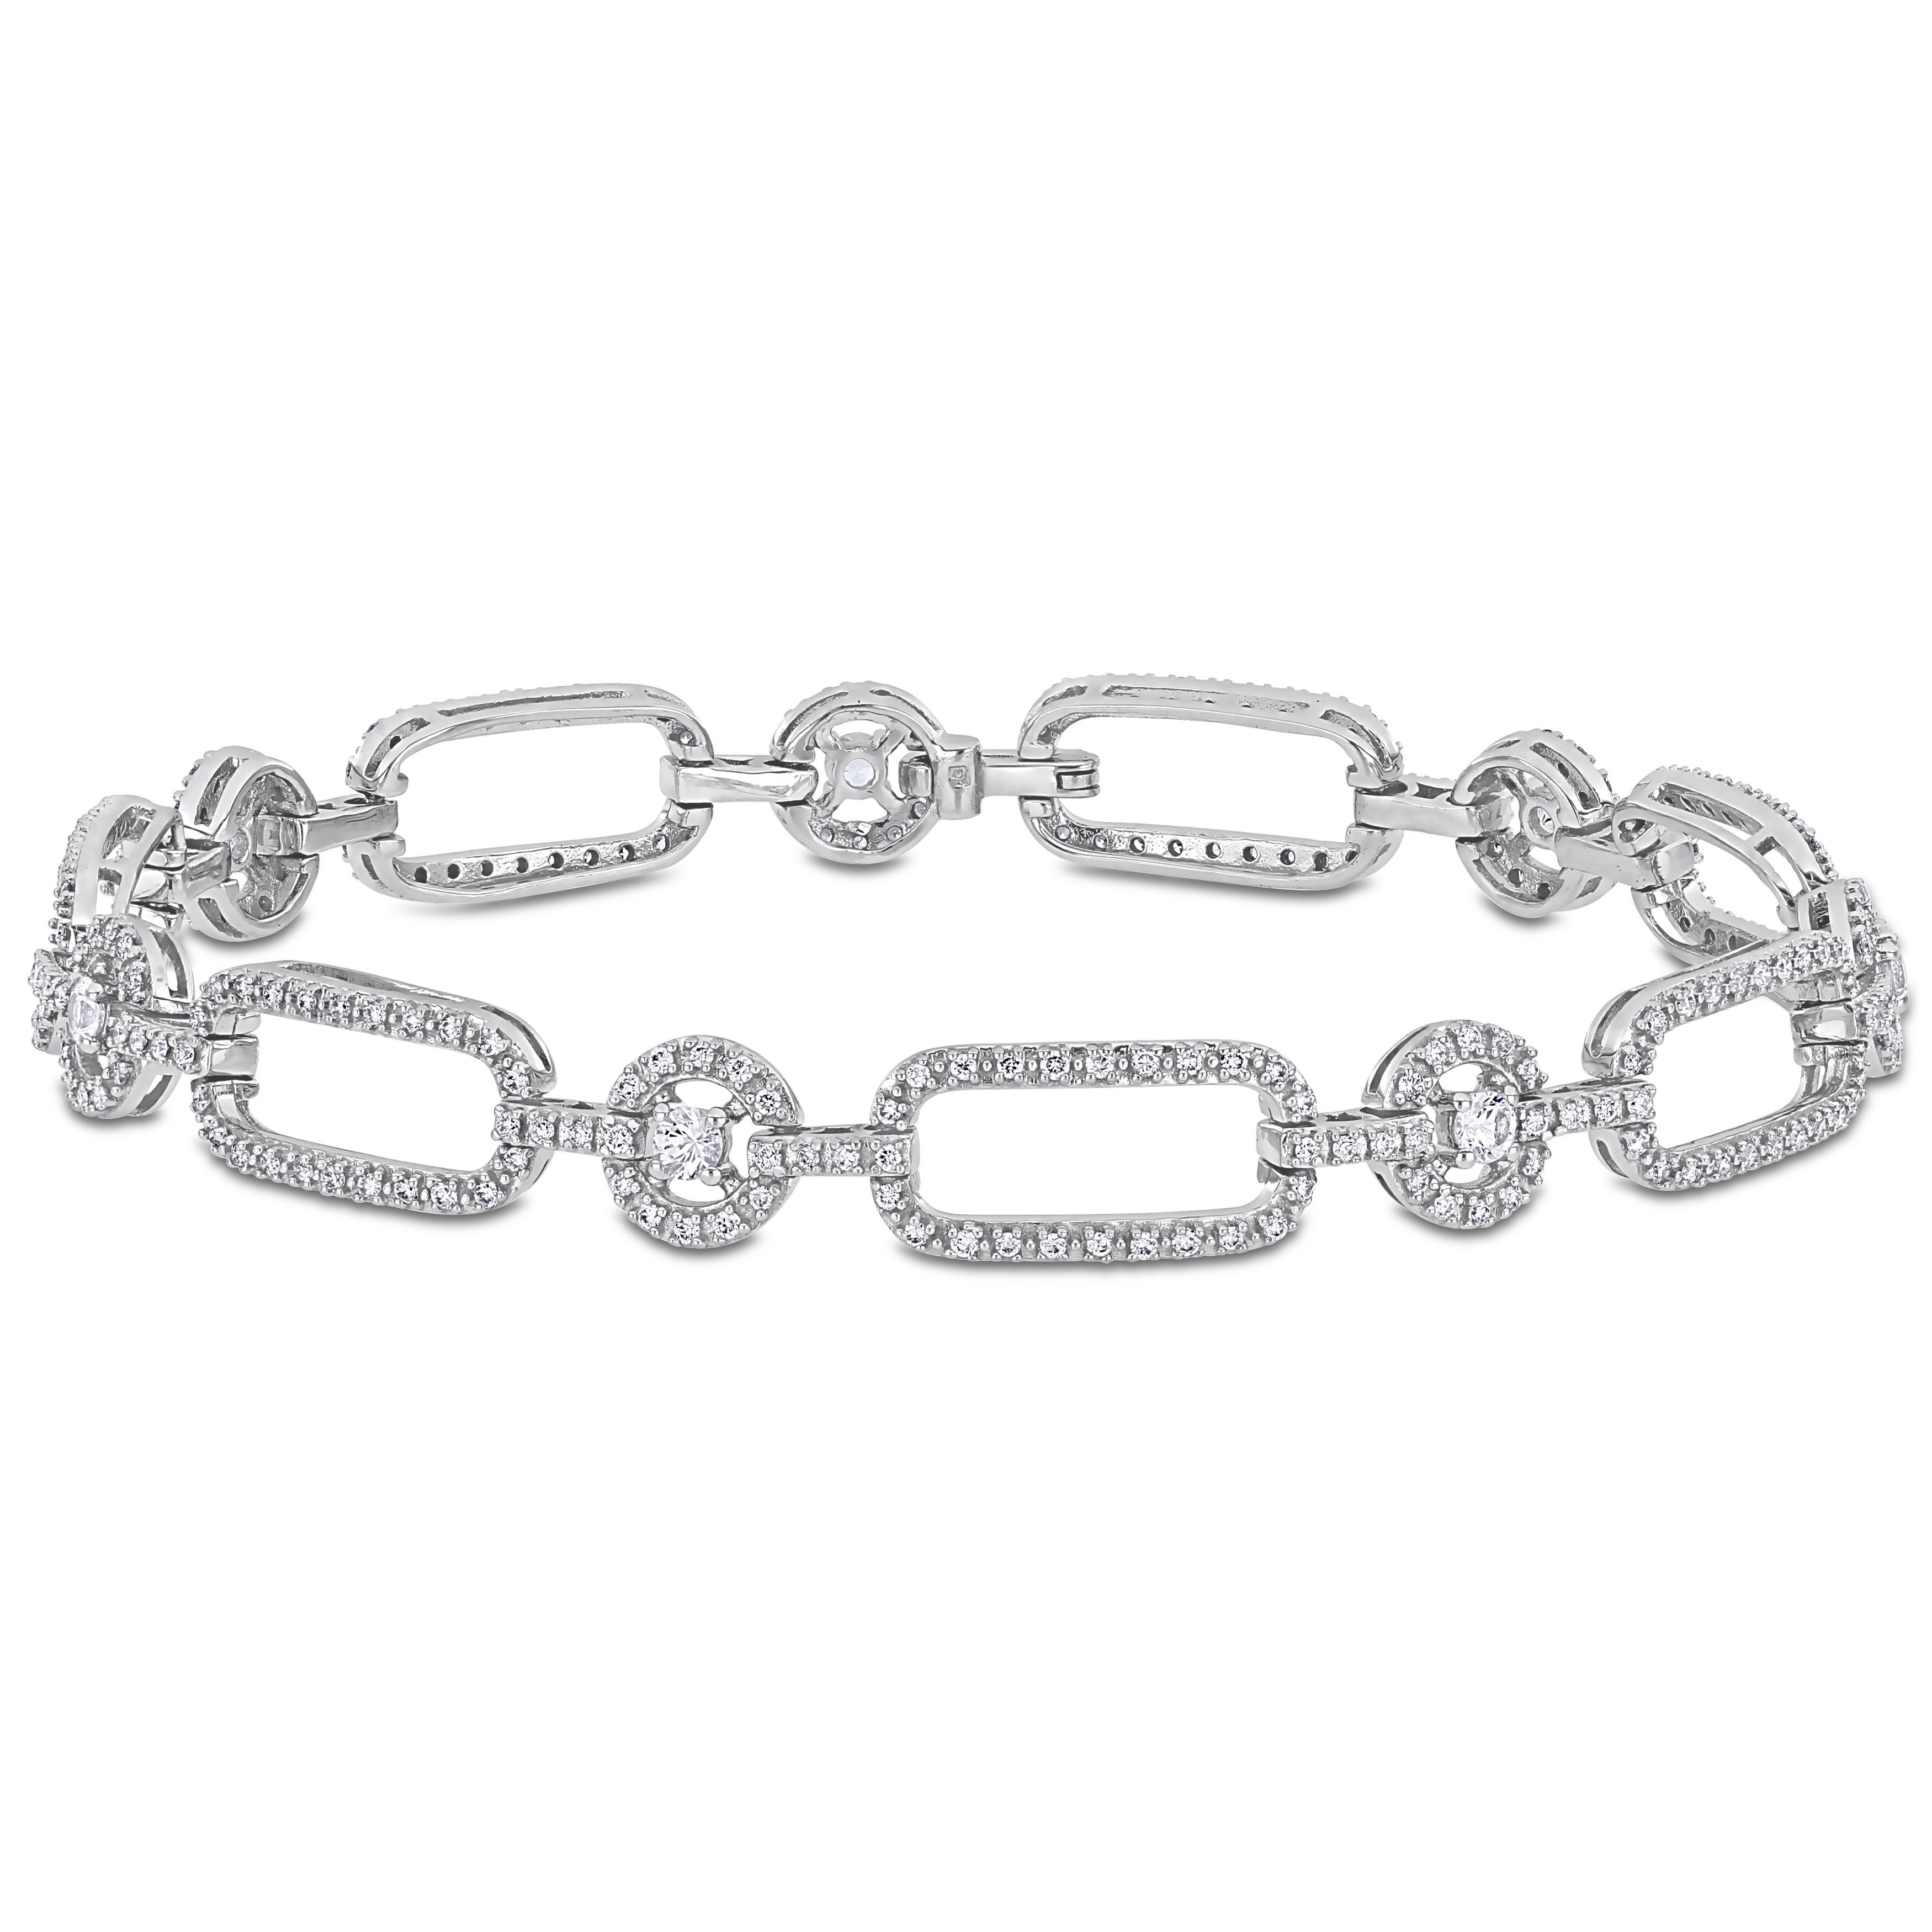 1/2 CT TGW White Sapphire and 1 CT TW Diamond Link Bracelet in 10k White Gold - 7.25 in.